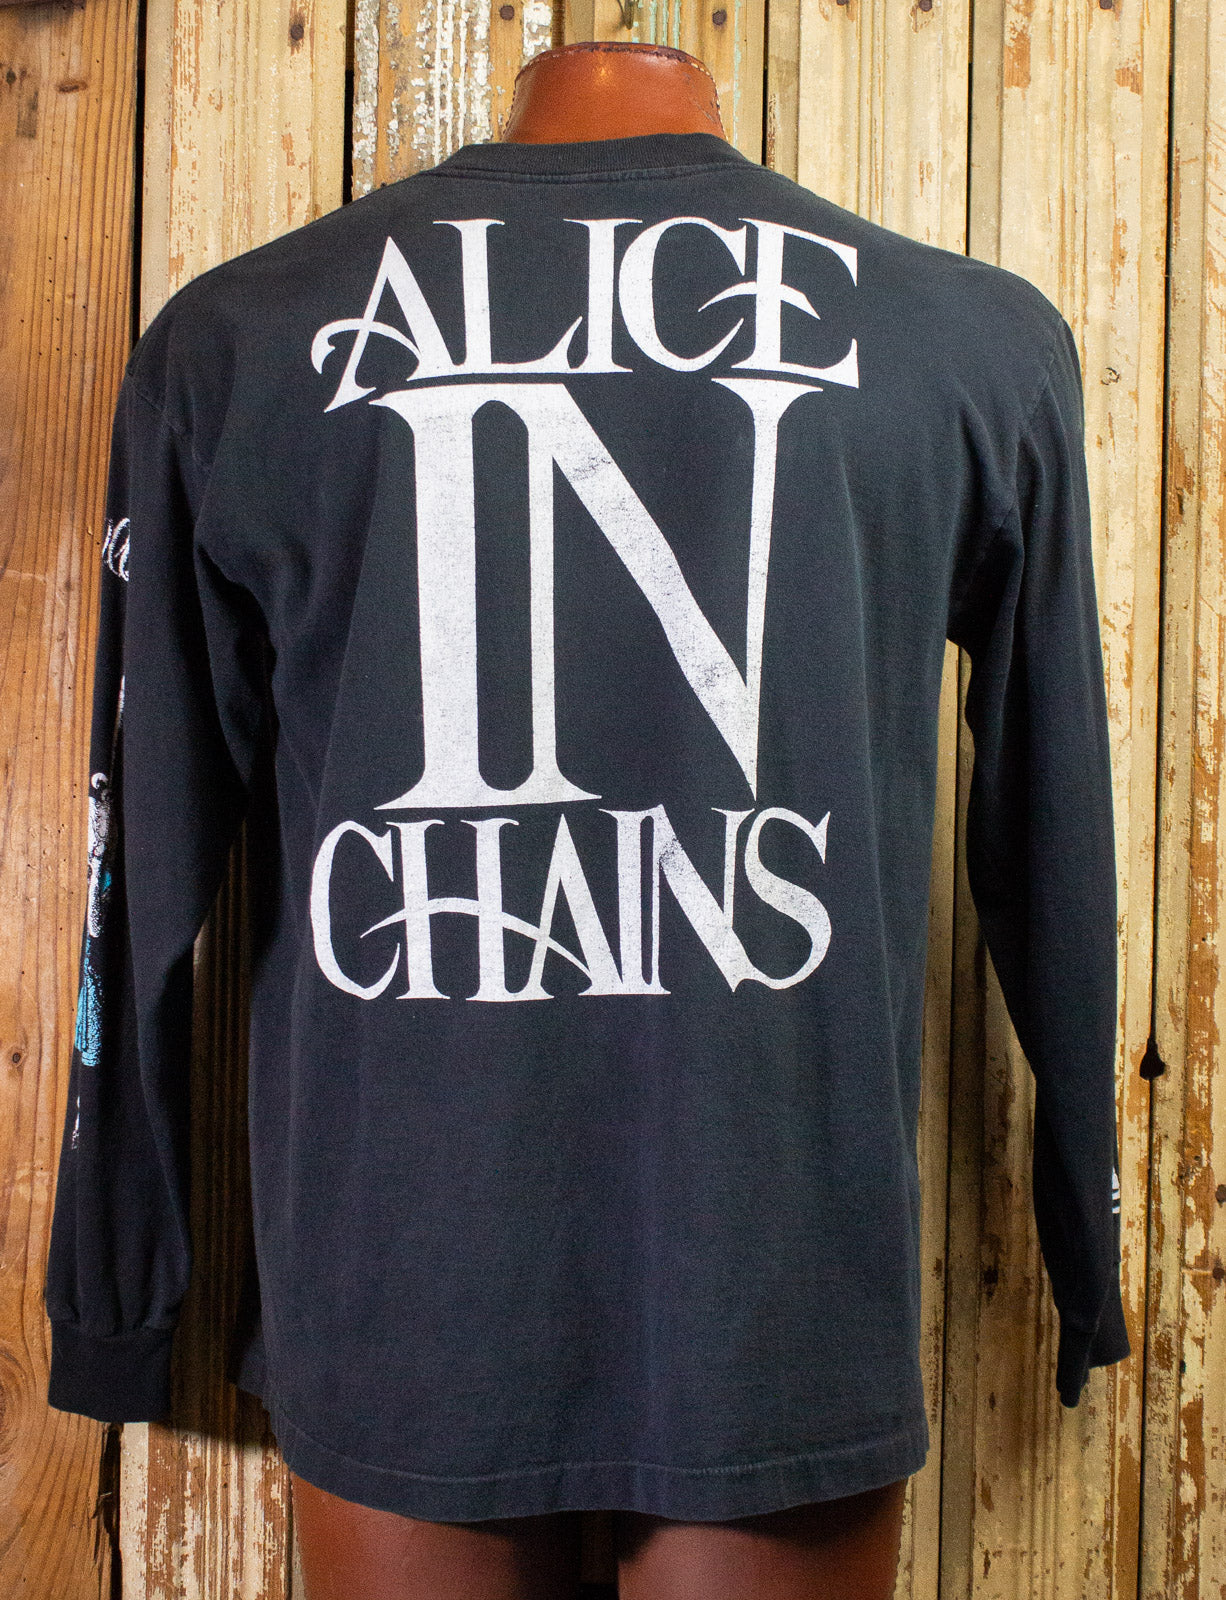 Vintage Alice In Chains Alice In Wonderland Long Sleeve Concert T Shirt 1992 XL